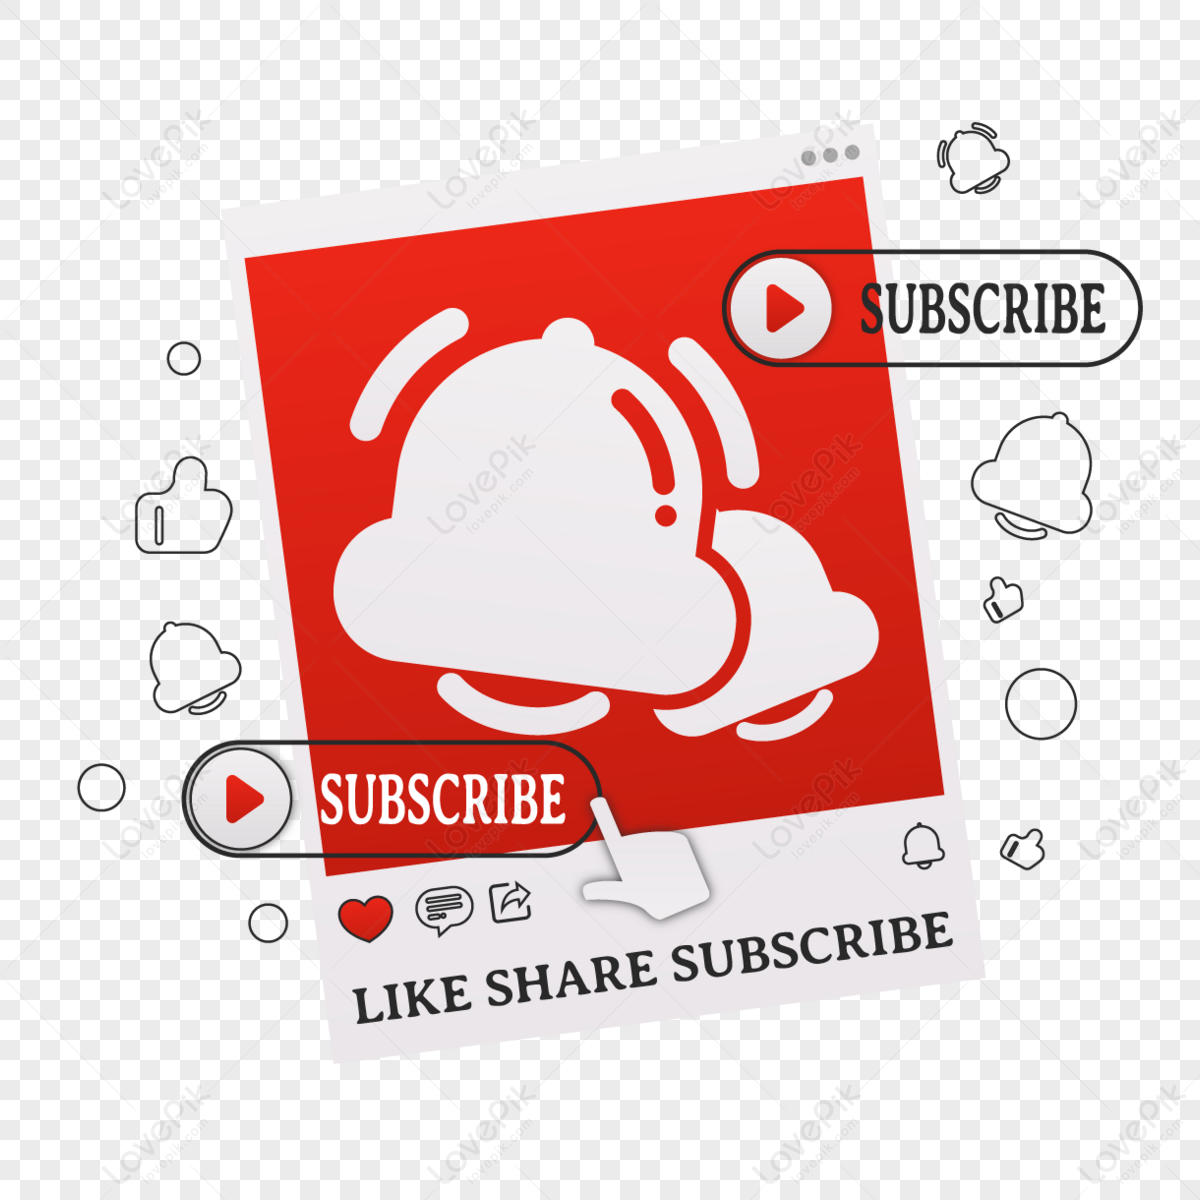 YouTube Like Logo PNG Pic | PNG Arts